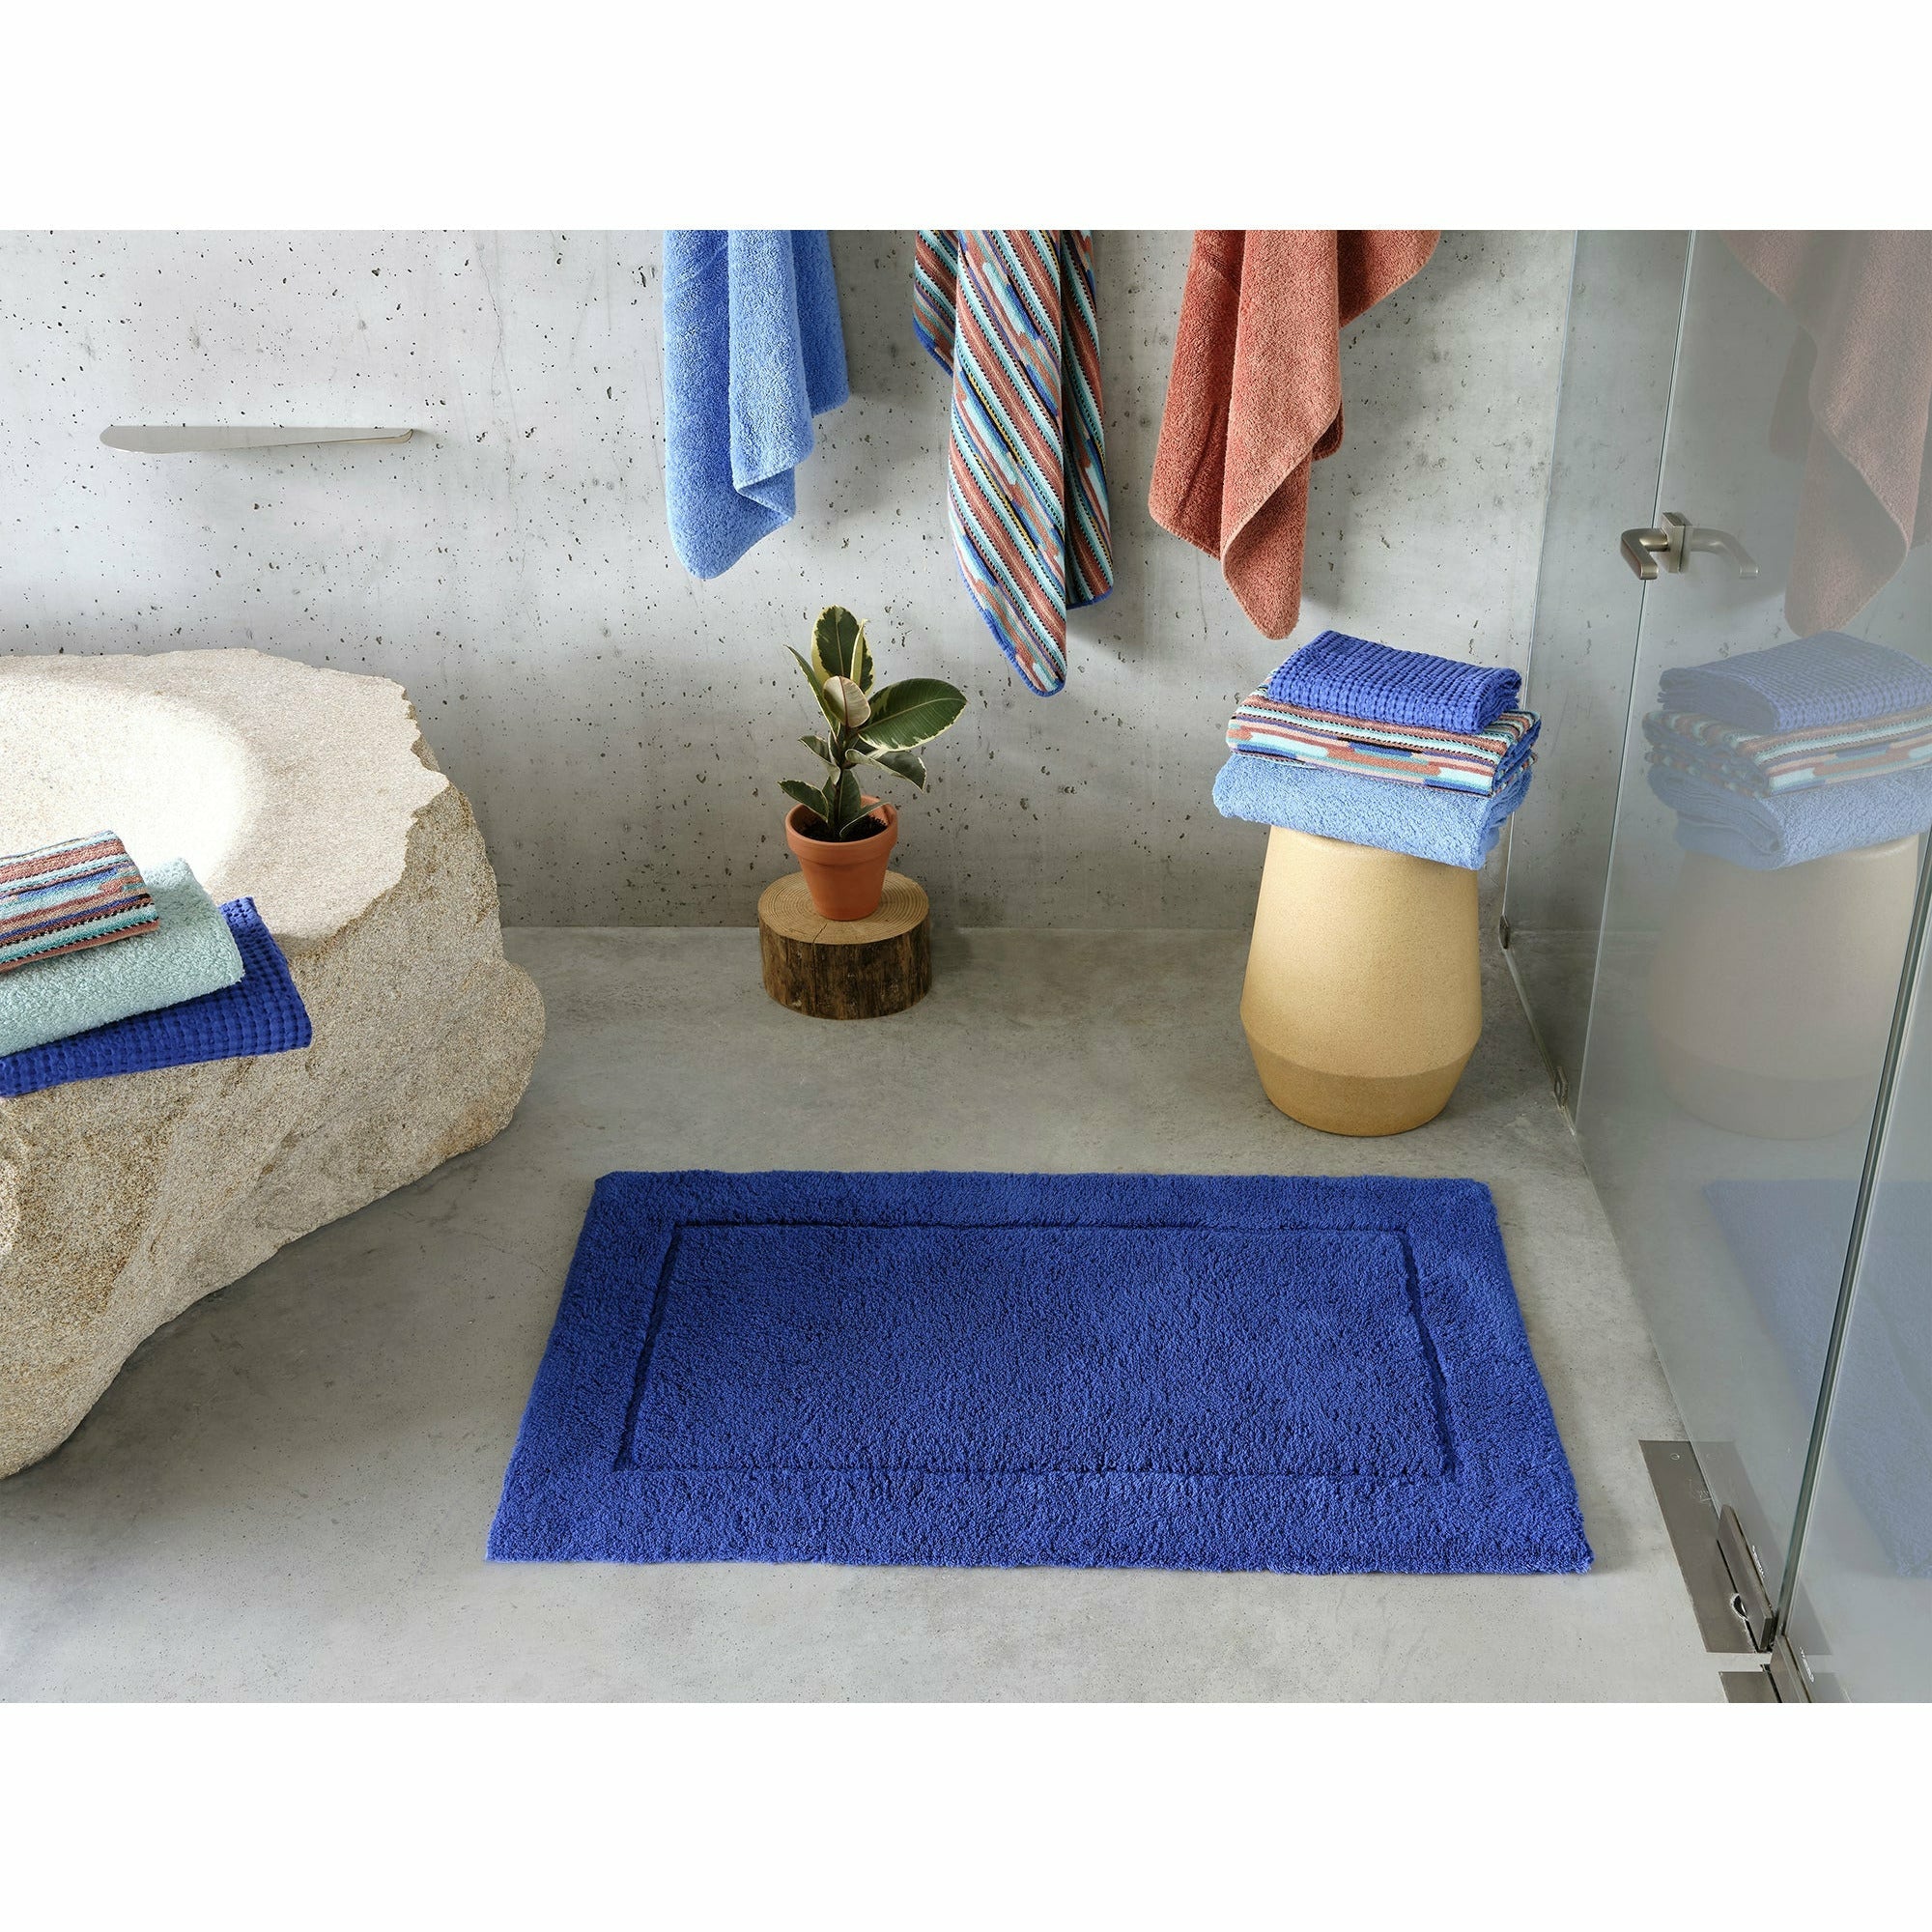 Caring for Your Habidecor Bath Rugs